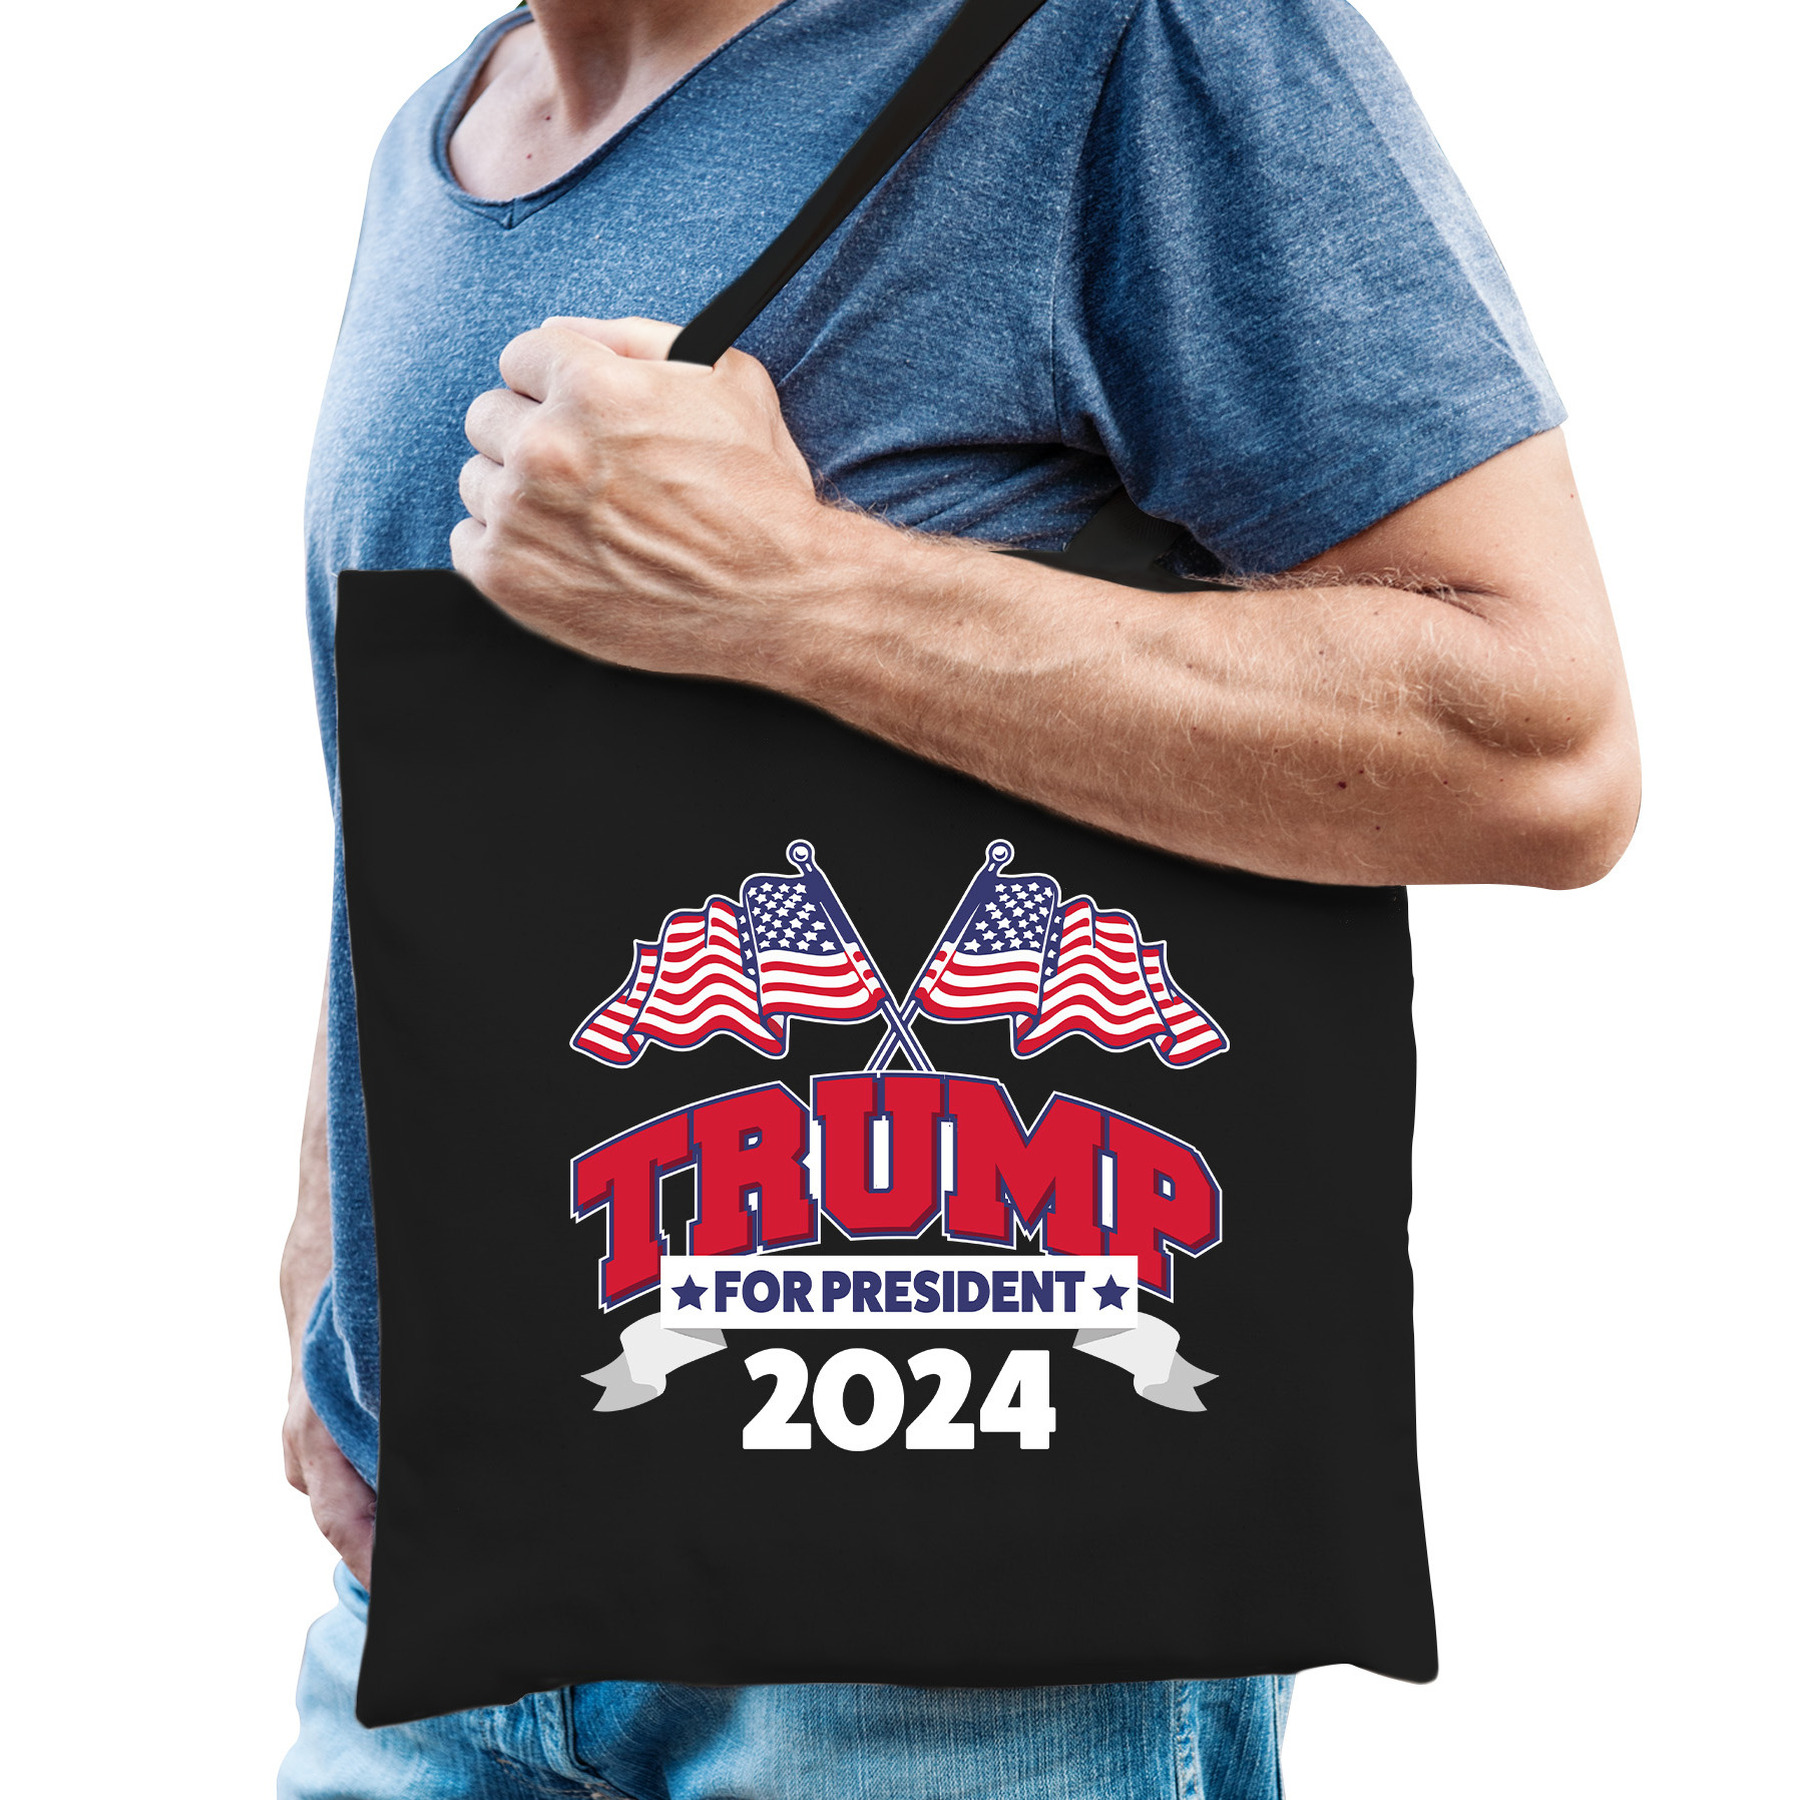 Tas Trump for president fout-grappig voor carnaval 42 x 38 cm